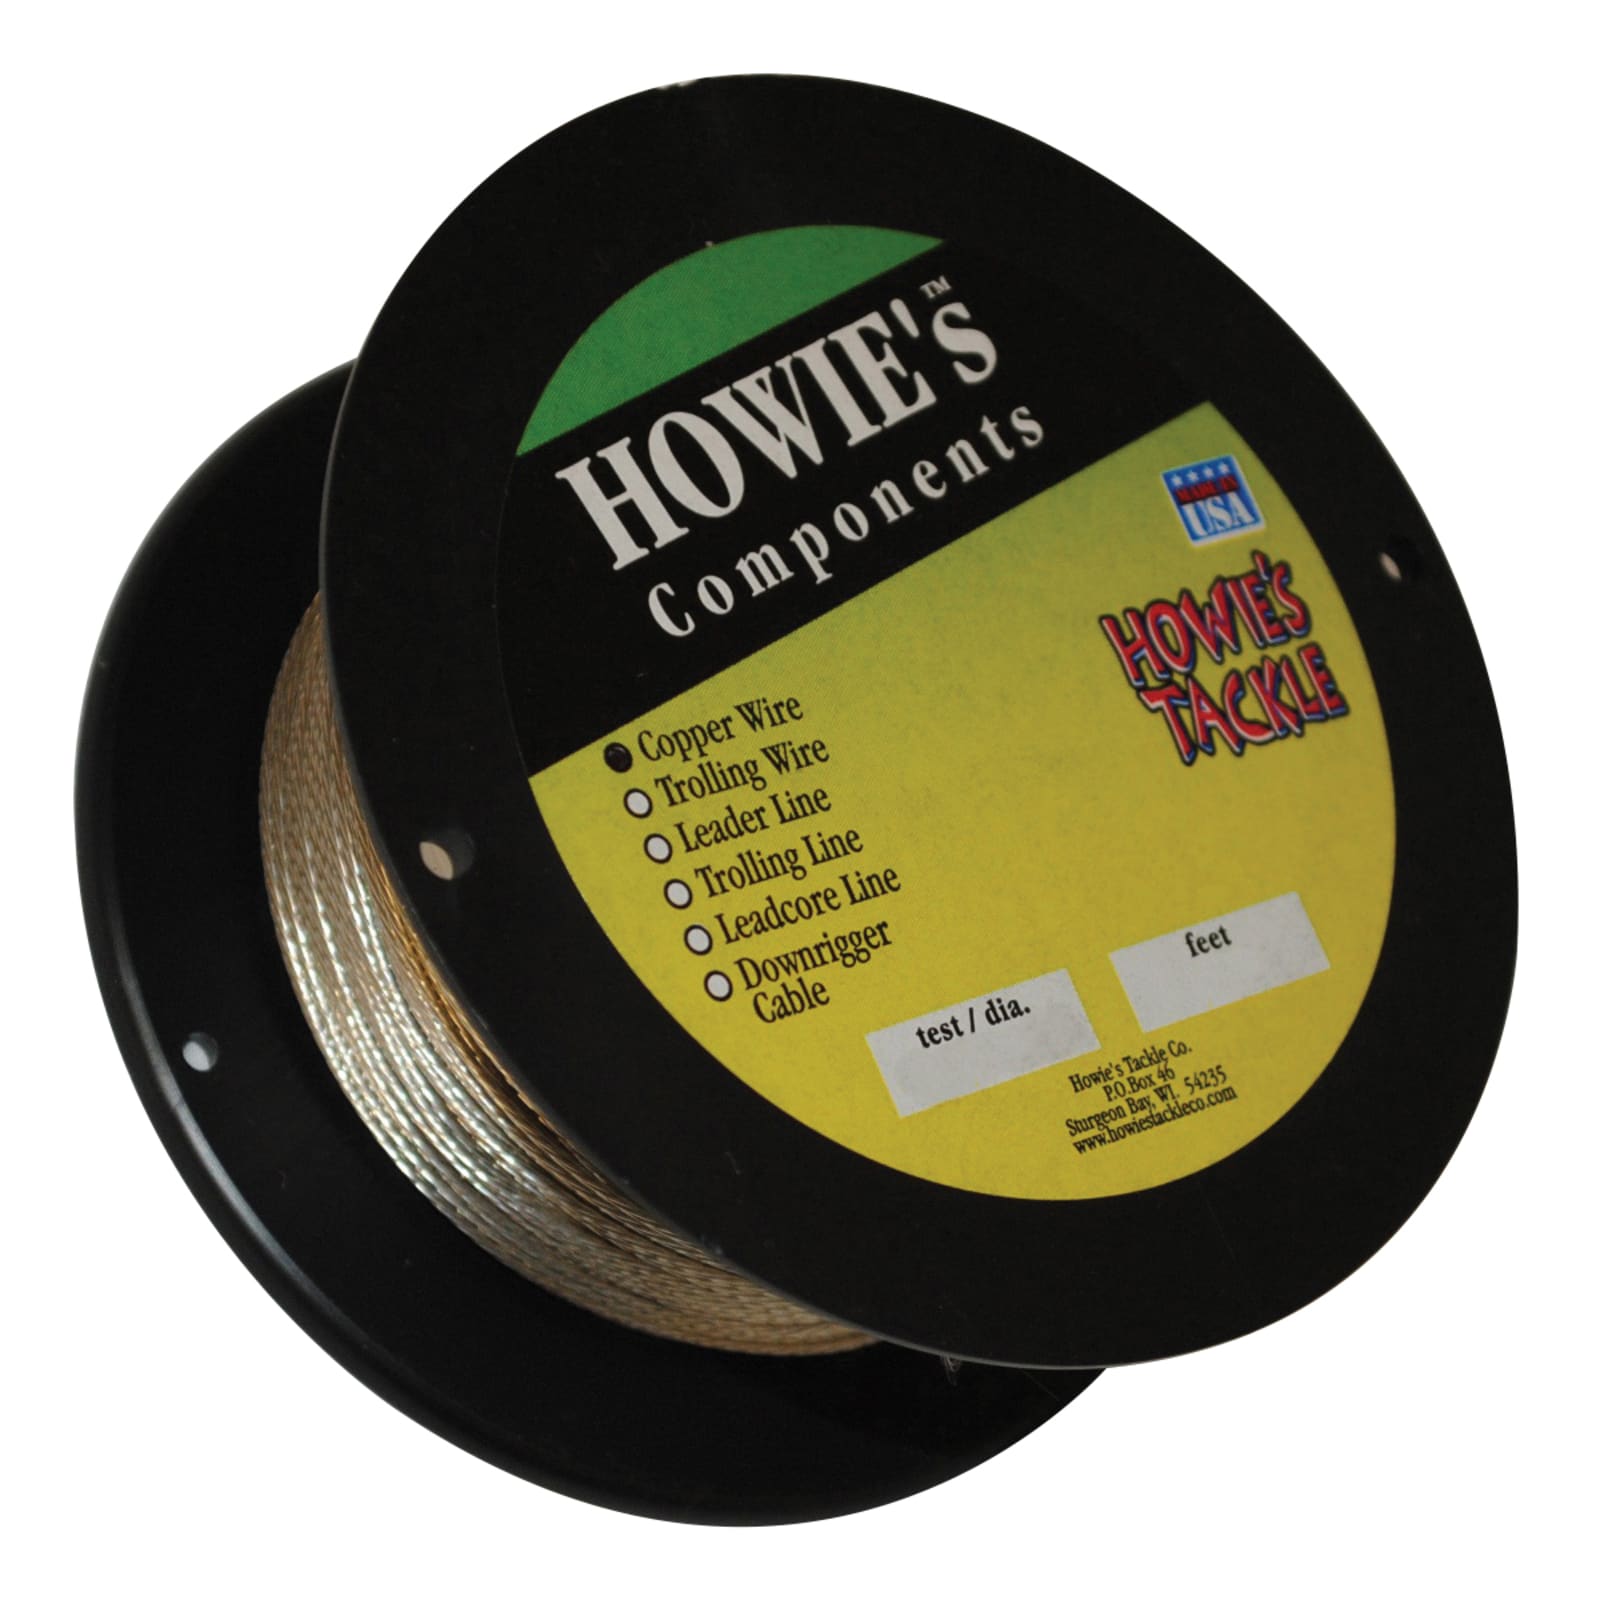 Howie's Tackle Super Copper Wire | Size: 300 ft | by Fleet Farm